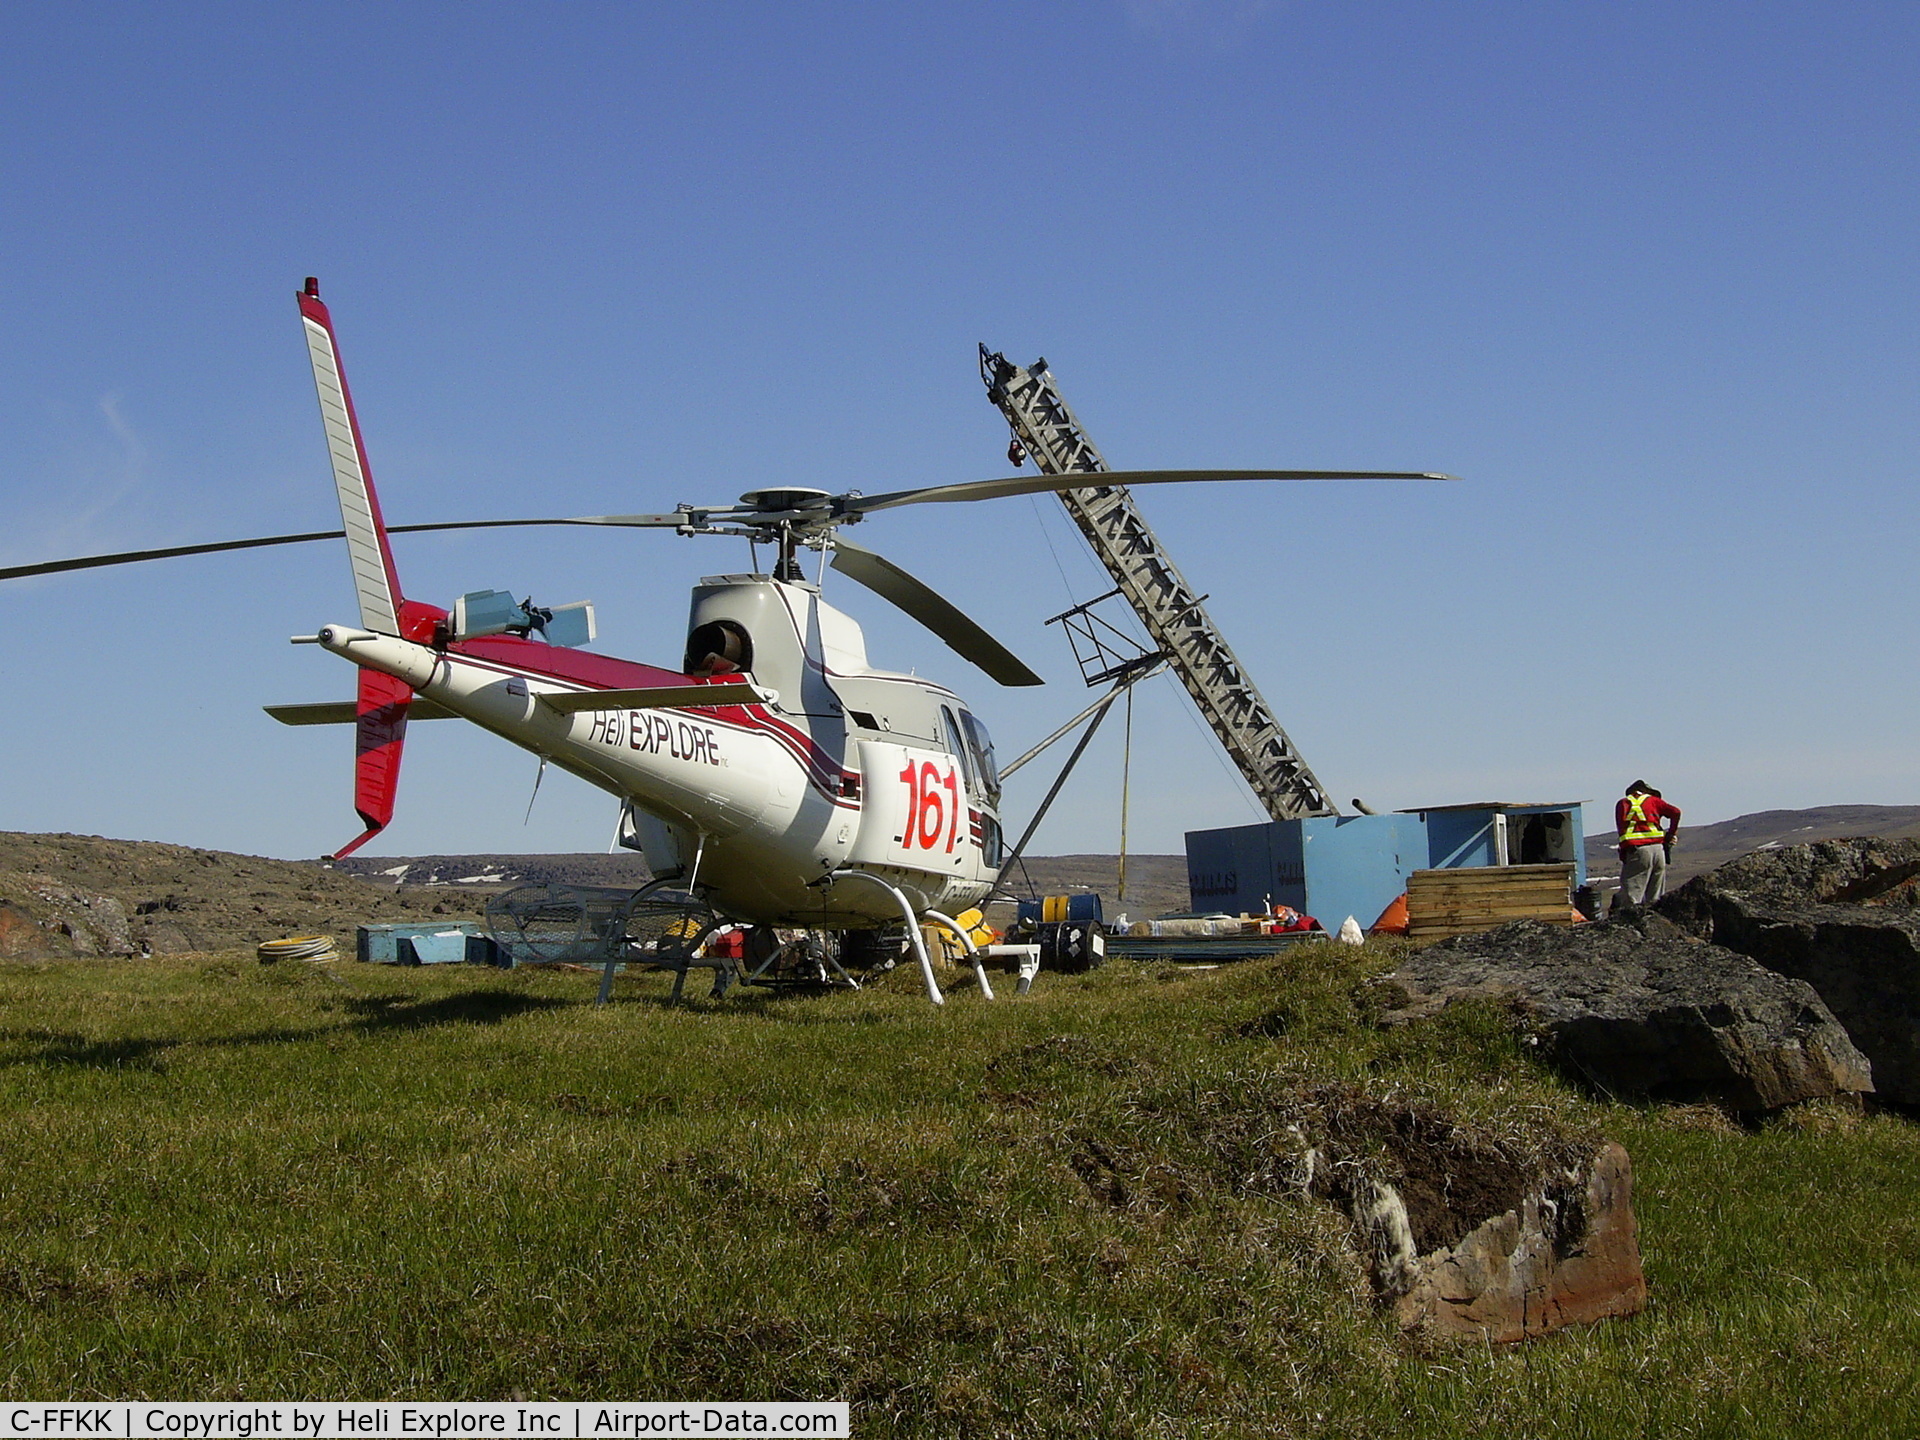 C-FFKK, 1980 Aerospatiale AS-350BA Ecureuil C/N 1242, Heli Explore inc helicopter waiting at the drill